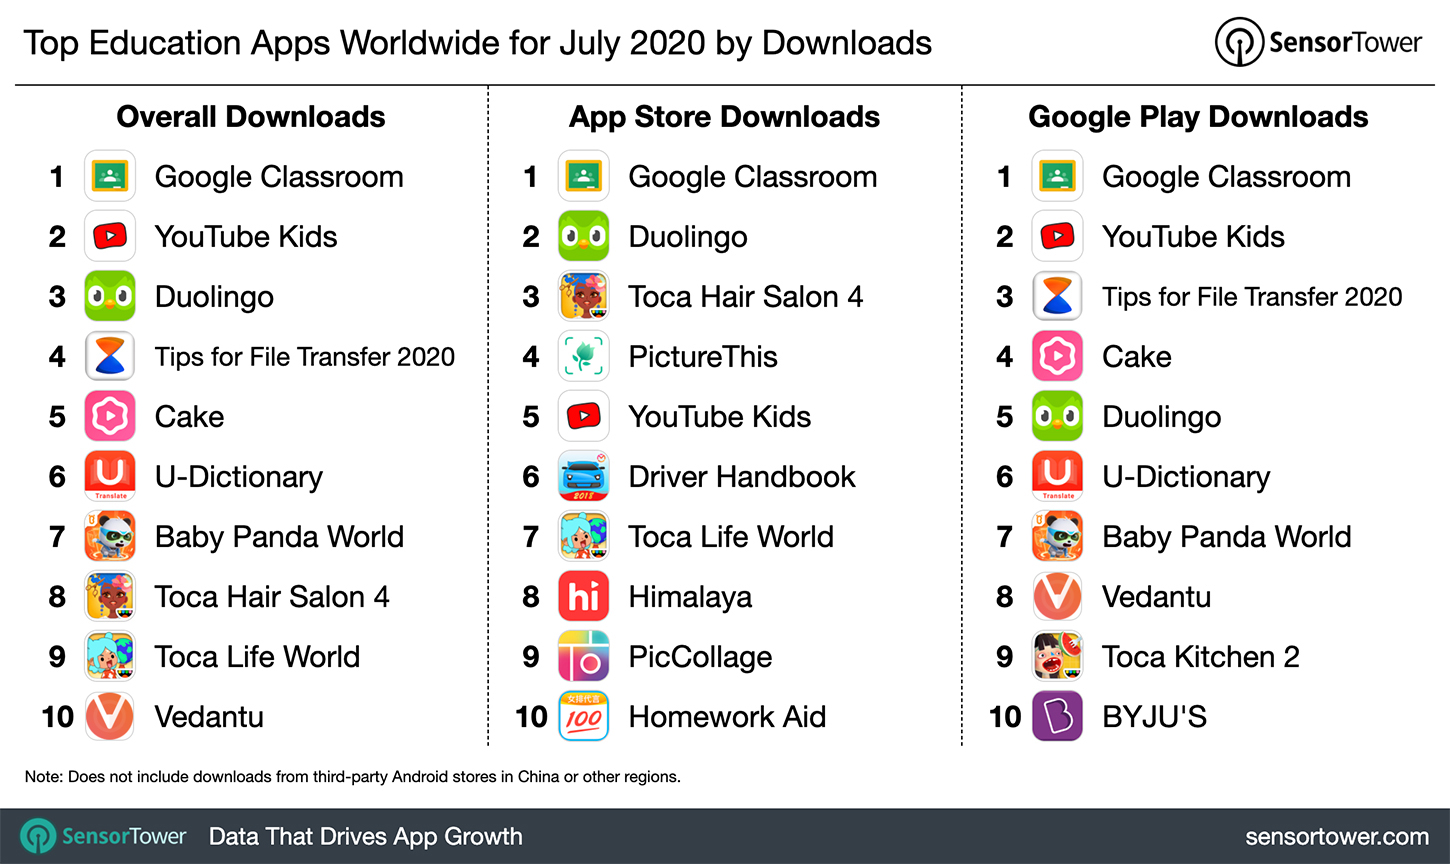 Top Education Apps Worldwide for July 2020 by Downloads